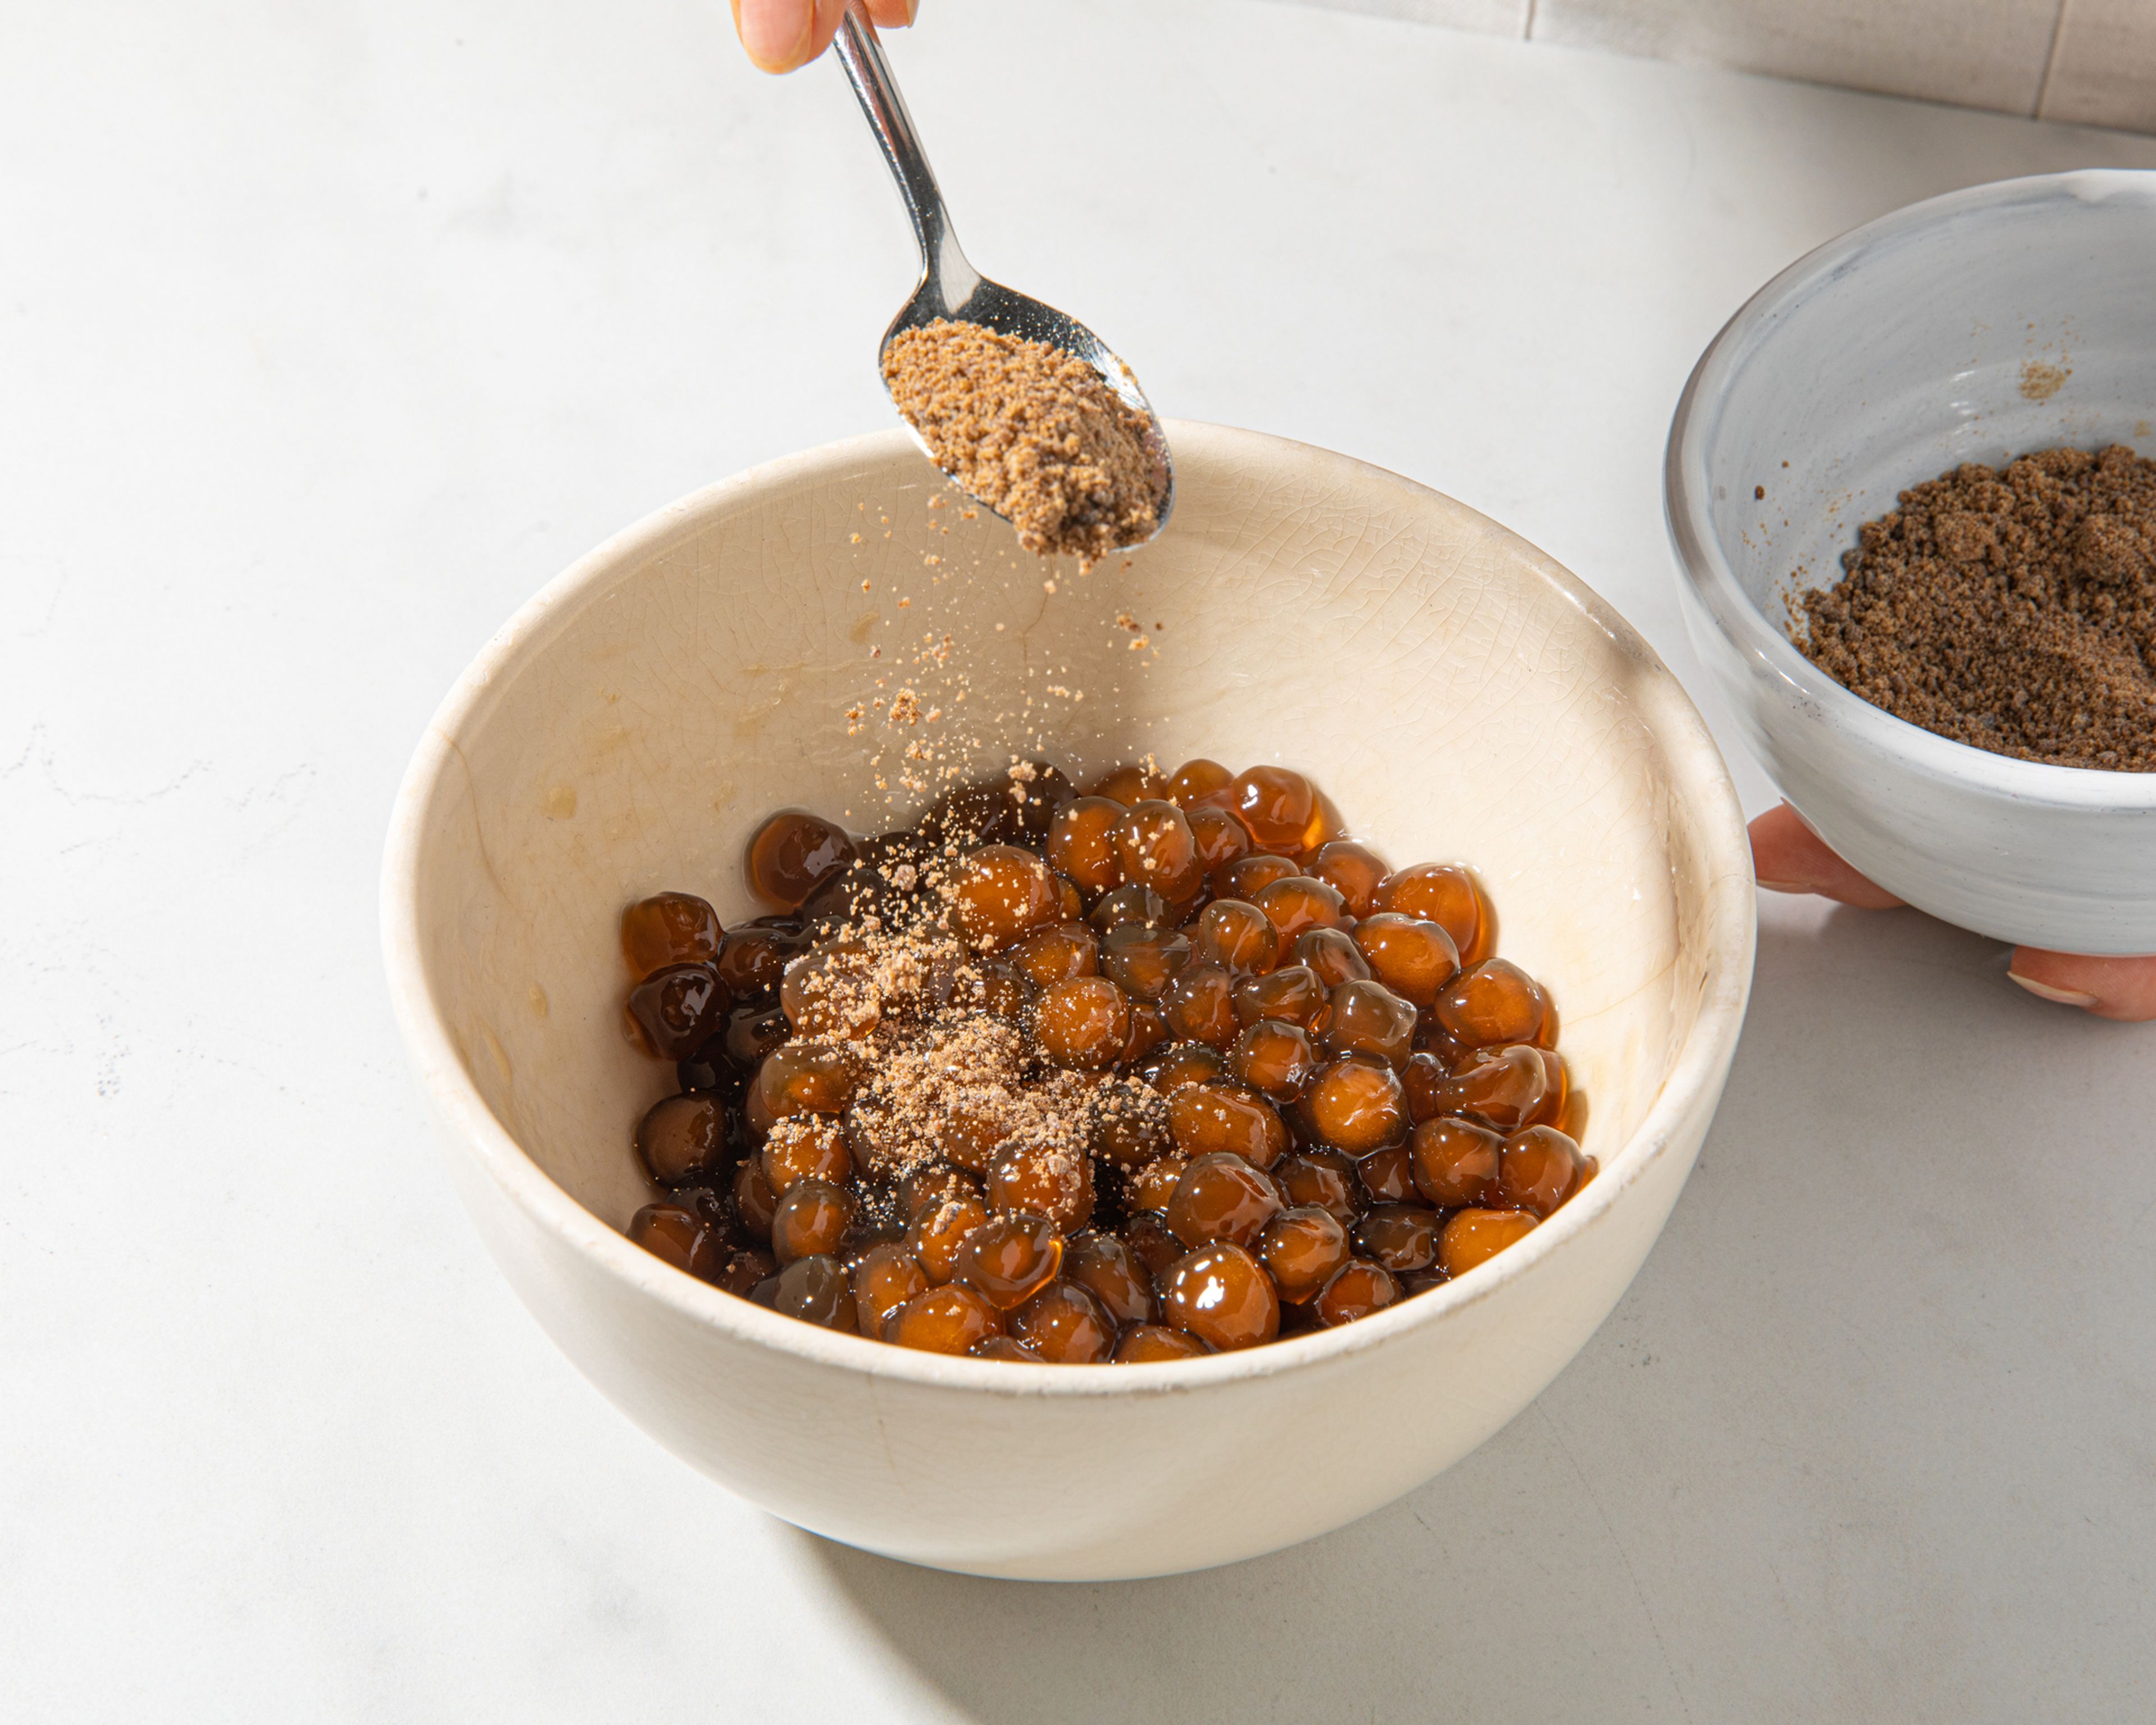 To cook the tapioca pearls, bring a pot of water to a boil. Add the pearls and let them simmer over medium heat for approx. 10 min. Turn off the heat and cover with a lid. Let the pearls rest for approx. 10 min., or until they are cooked through and transparent. Strain the pearls through a sieve, rinse them with cold water and add them to a bowl. To prevent sticking, you can add a few tablespoons of cold water or more brown sugar.